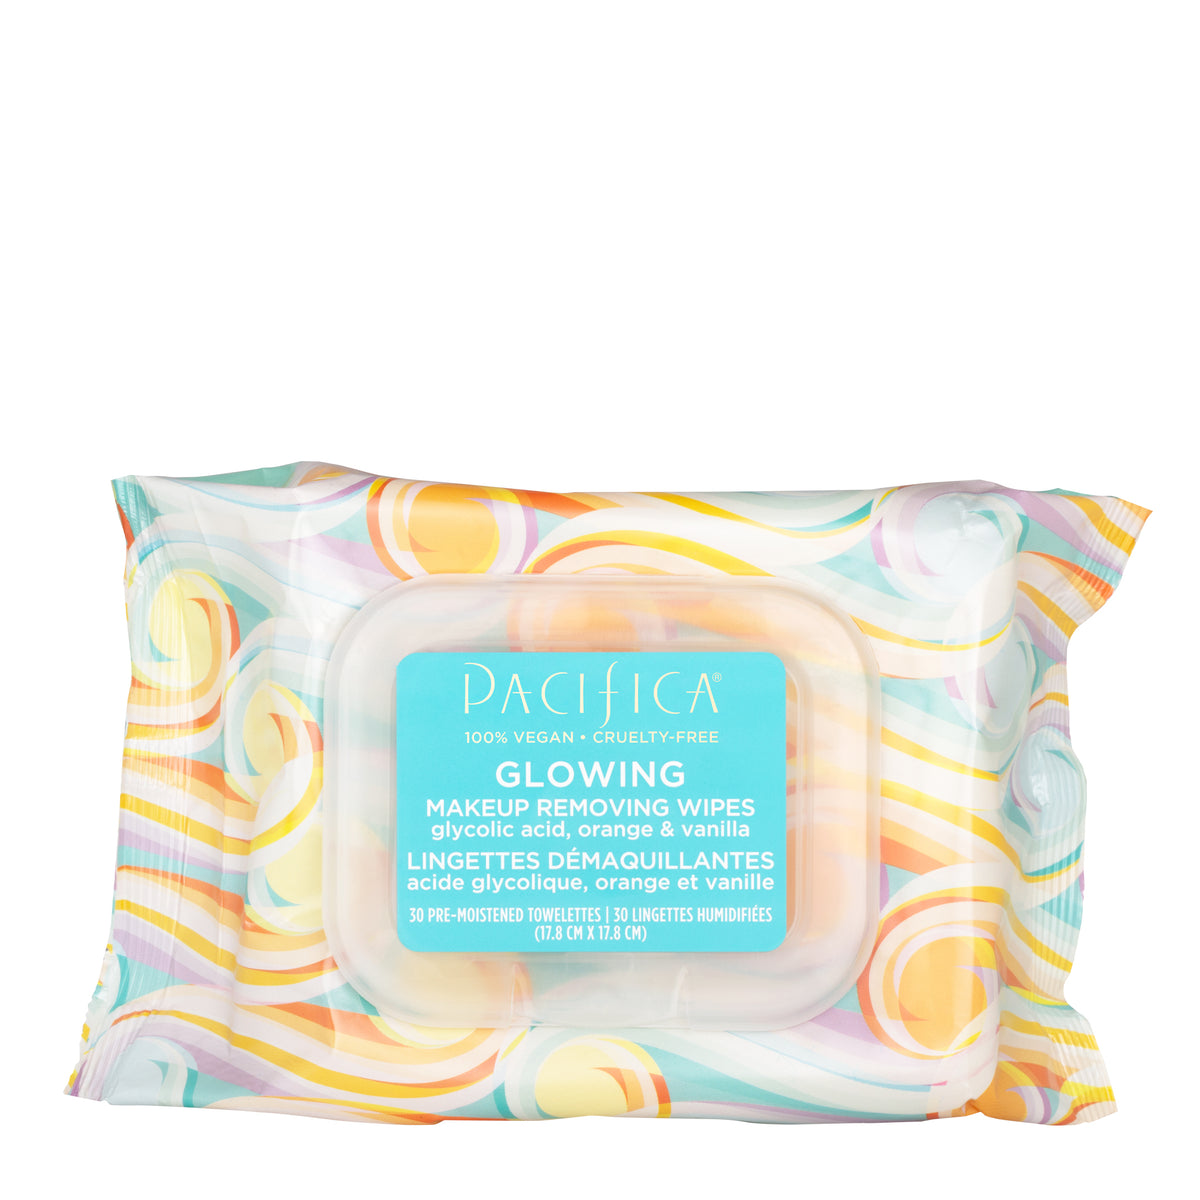 Glowing Glycolic Acid, Orange & Vanilla Makeup Removing Wipes - Skin Care - Pacifica Beauty